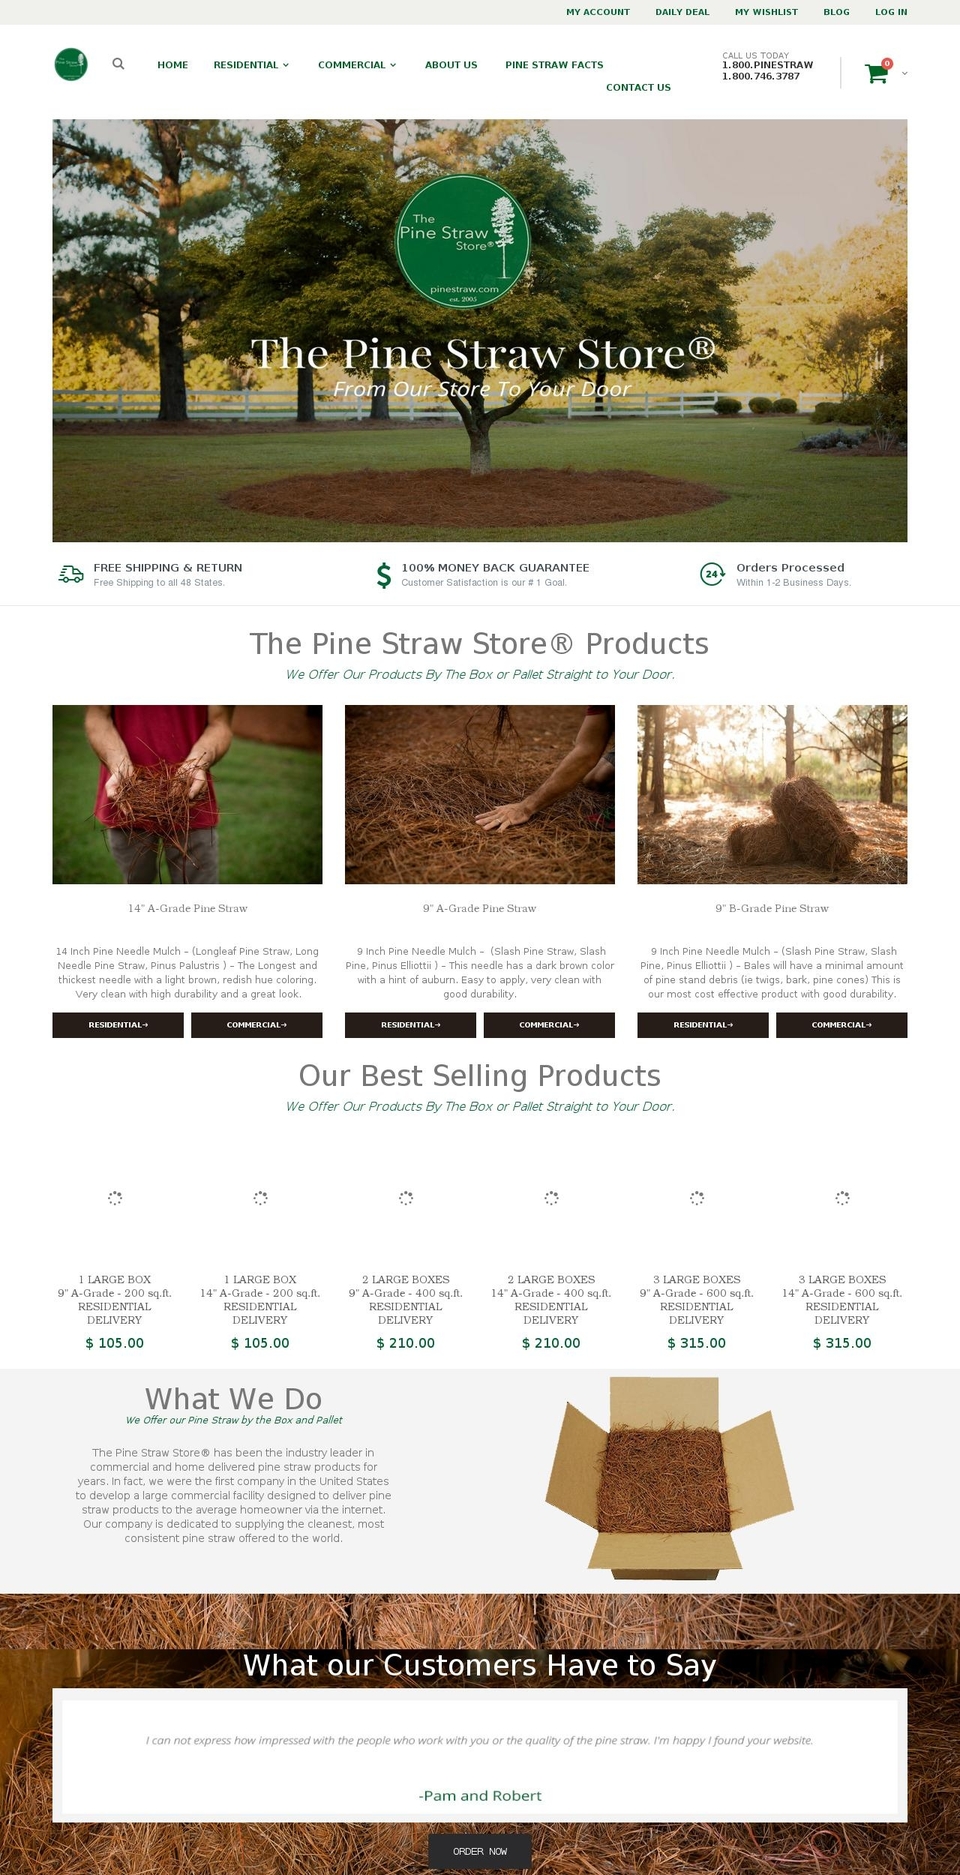 The Pine Straw Store Shopify theme site example pinestrawharvest.com